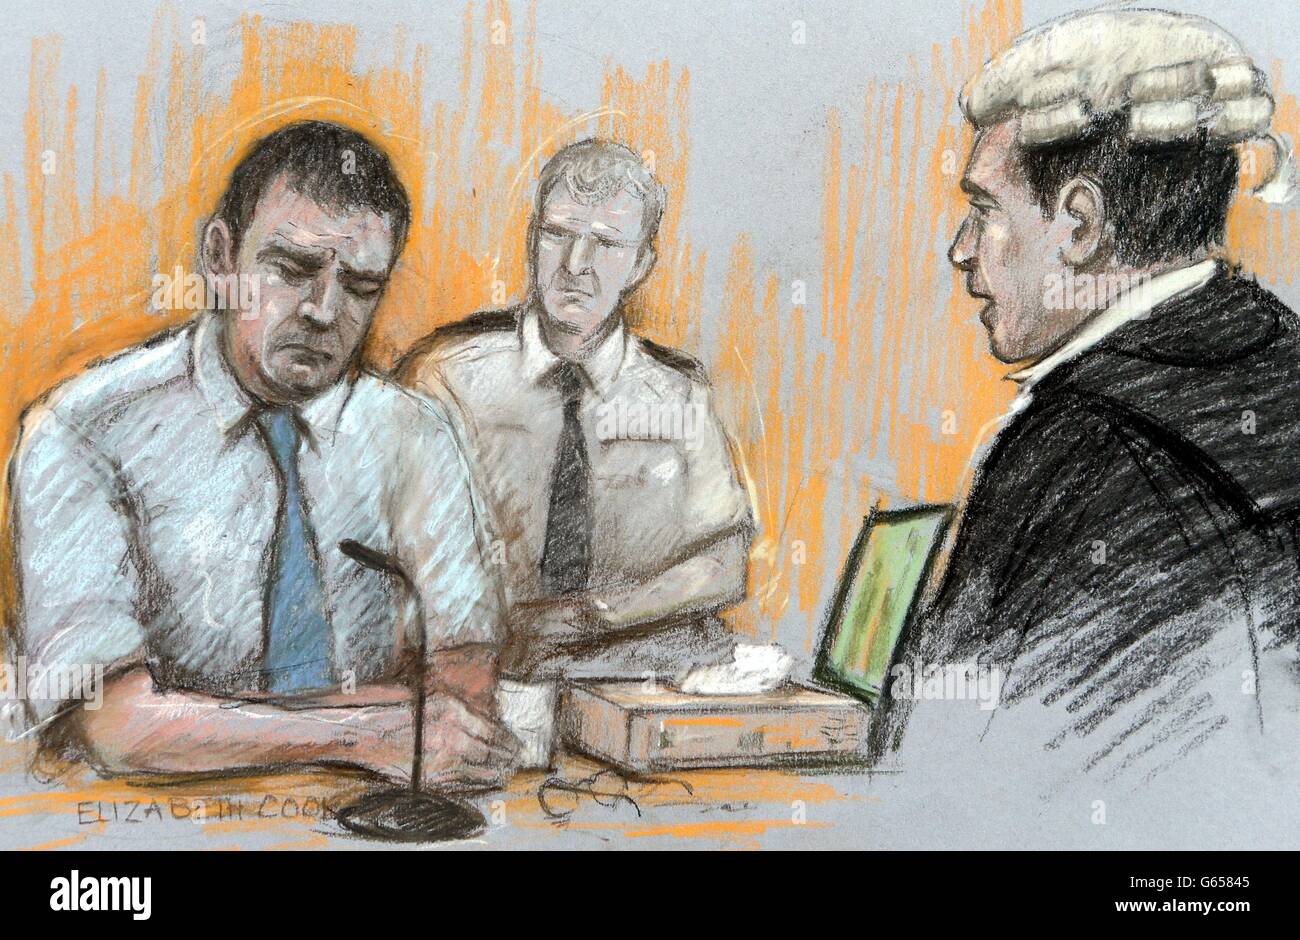 Courts artist impression by Elizabeth Cook of Mark Bridger, 47, of Ceinws, mid-Wales and Defence QC Brendan Kelly during his testimony at Mold Crown Court, where the former slaughterhouse worker is accused of abducting and murdering schoolgirl April Jones in a "sexually motivated" attack. Stock Photo